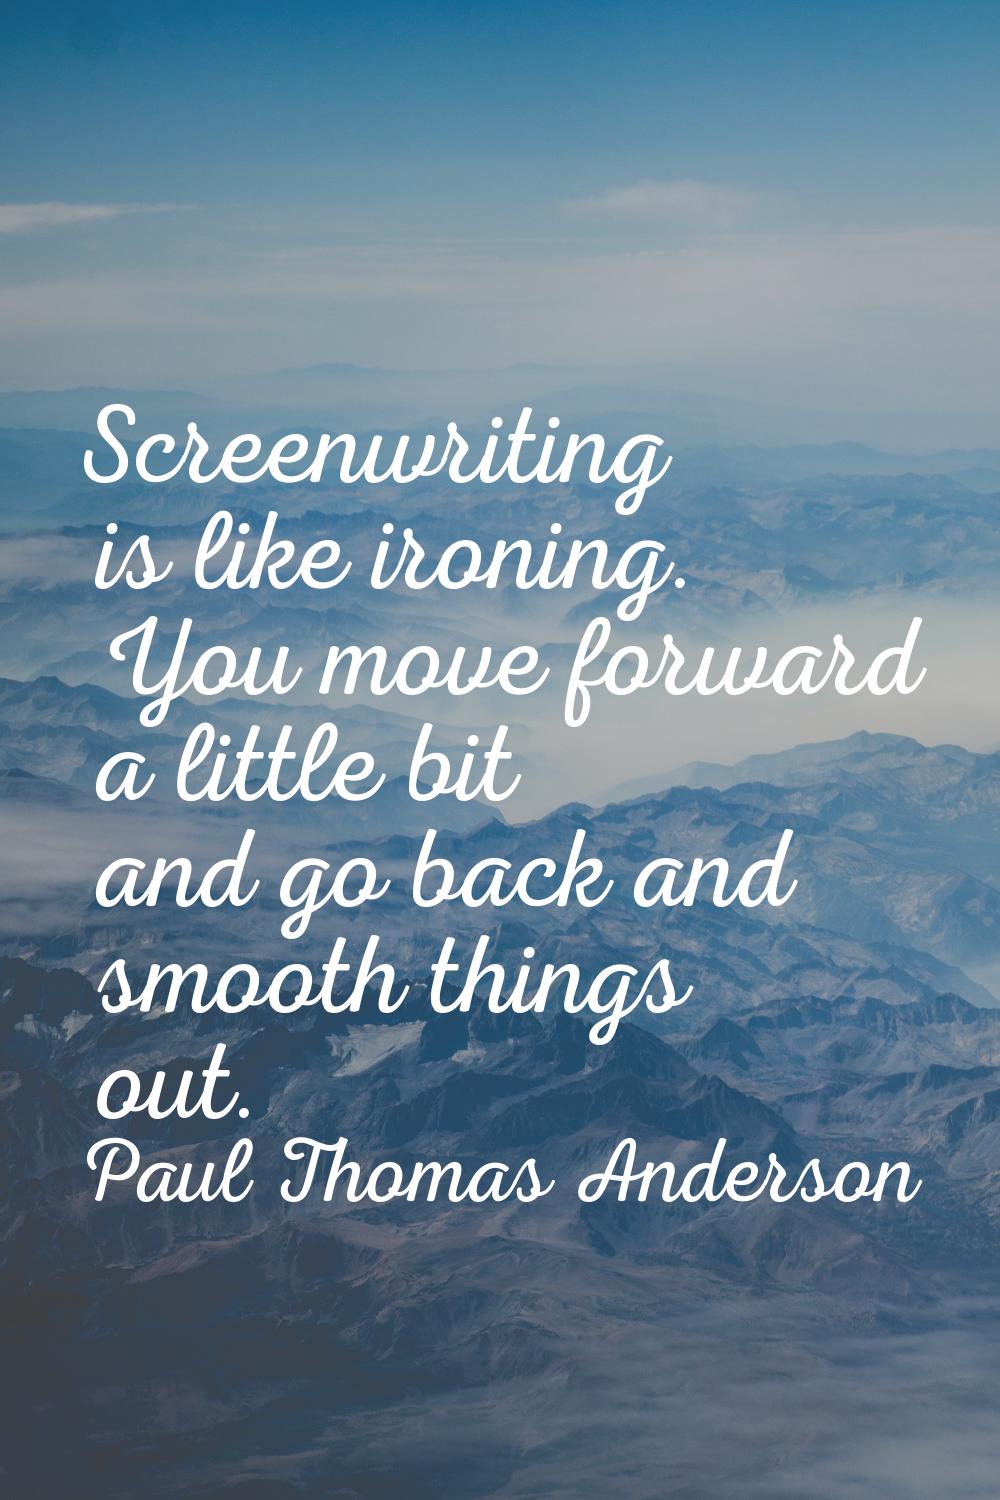 Screenwriting is like ironing. You move forward a little bit and go back and smooth things out.